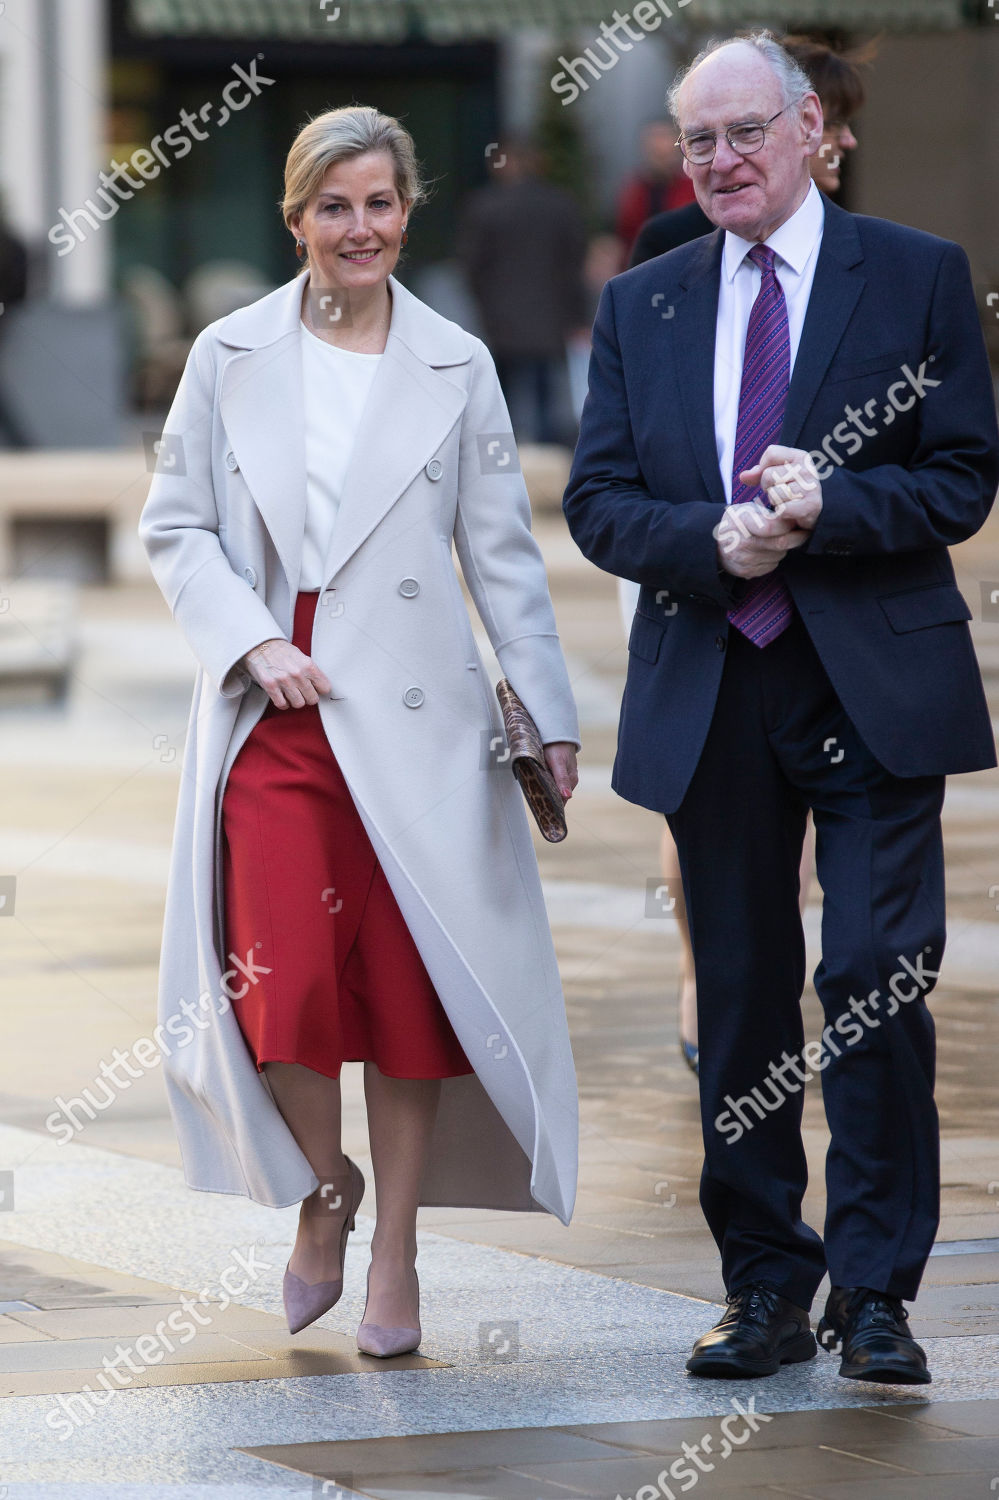 sophie-countess-of-wessex-attends-womens-network-forum-and-market-opening-ceremony-international-womens-day-london-uk-08-mar-2019-shutterstock-editorial-10147941k.jpg